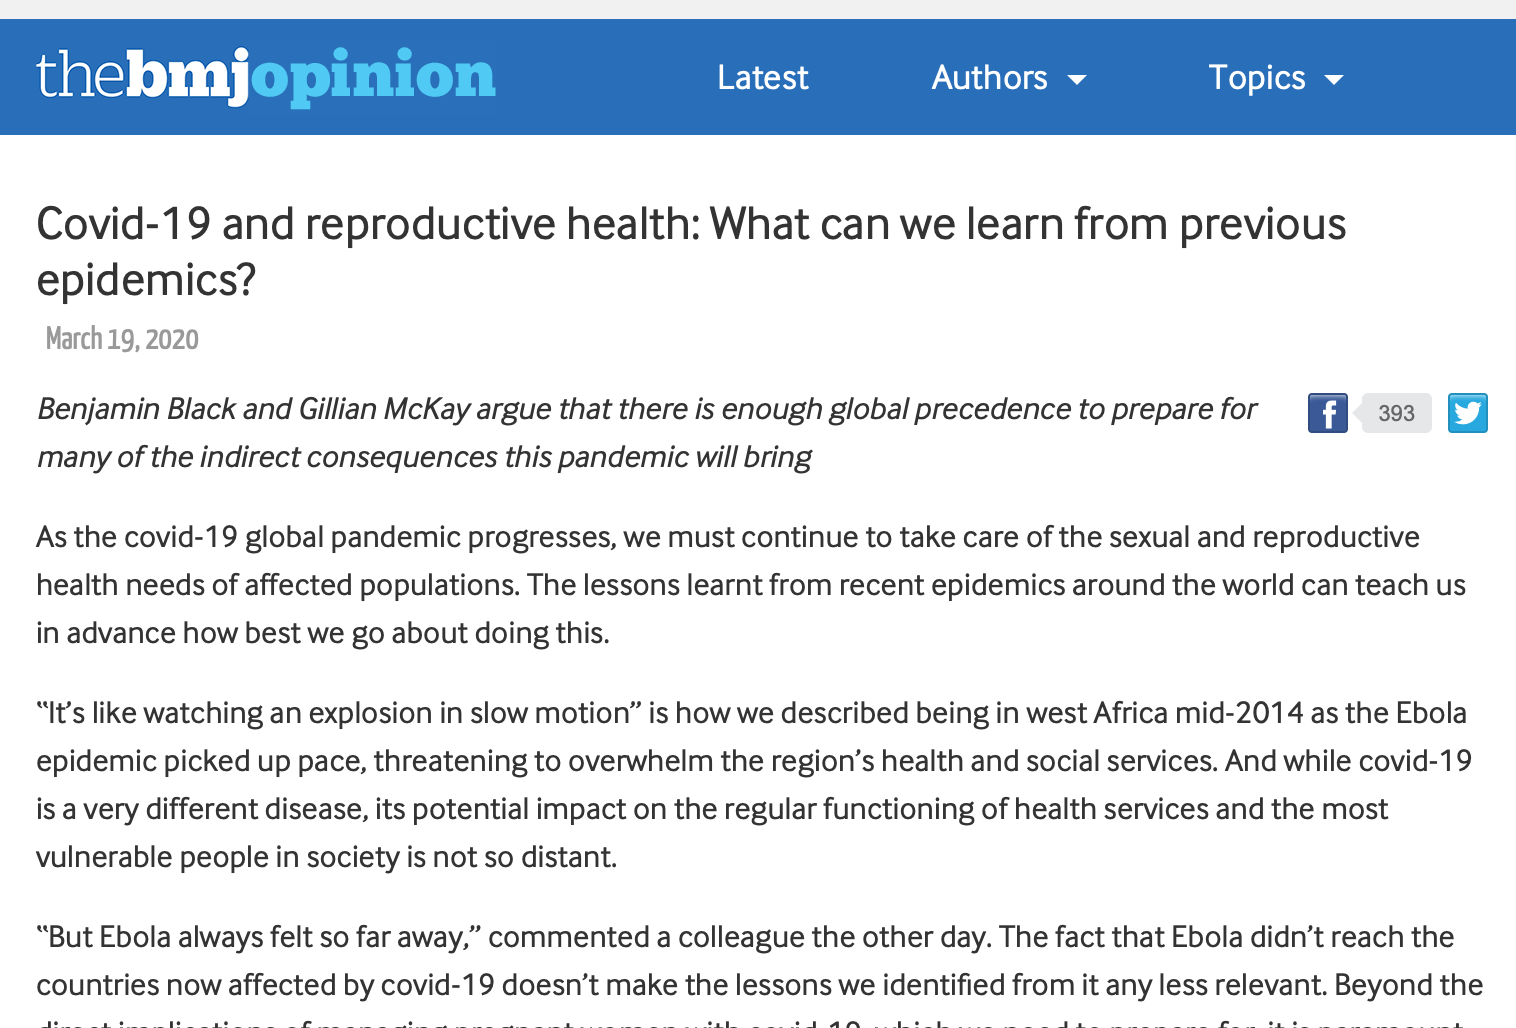 COVID-19 and reproductive health- What can we learn from previous epidemics